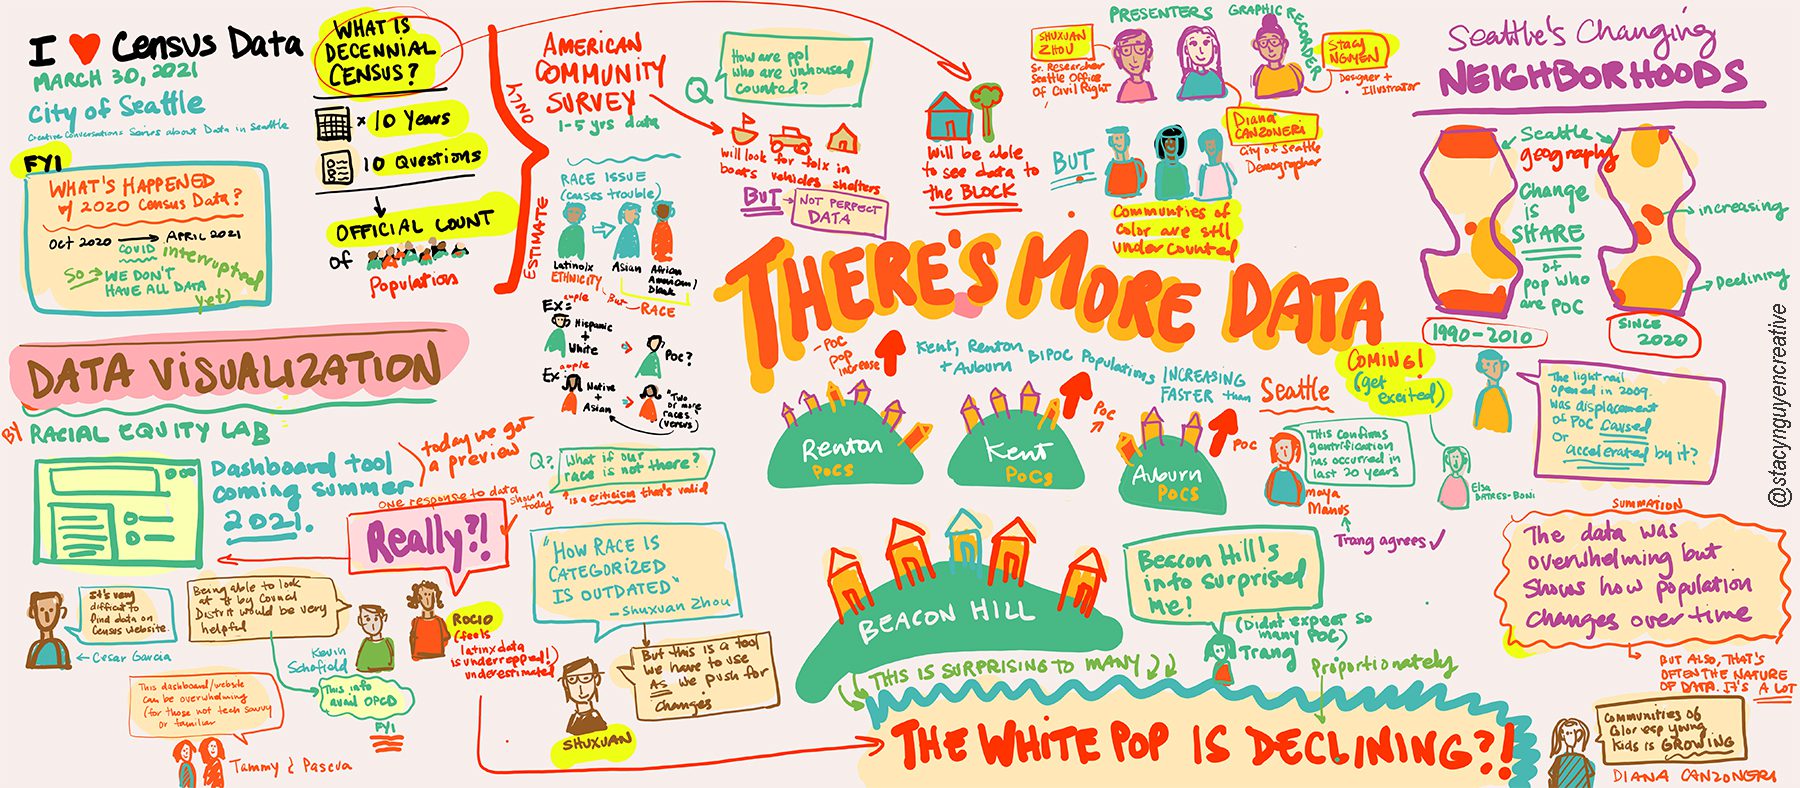 Racial demographics in Seattle illustration by Stacy Nguyen.